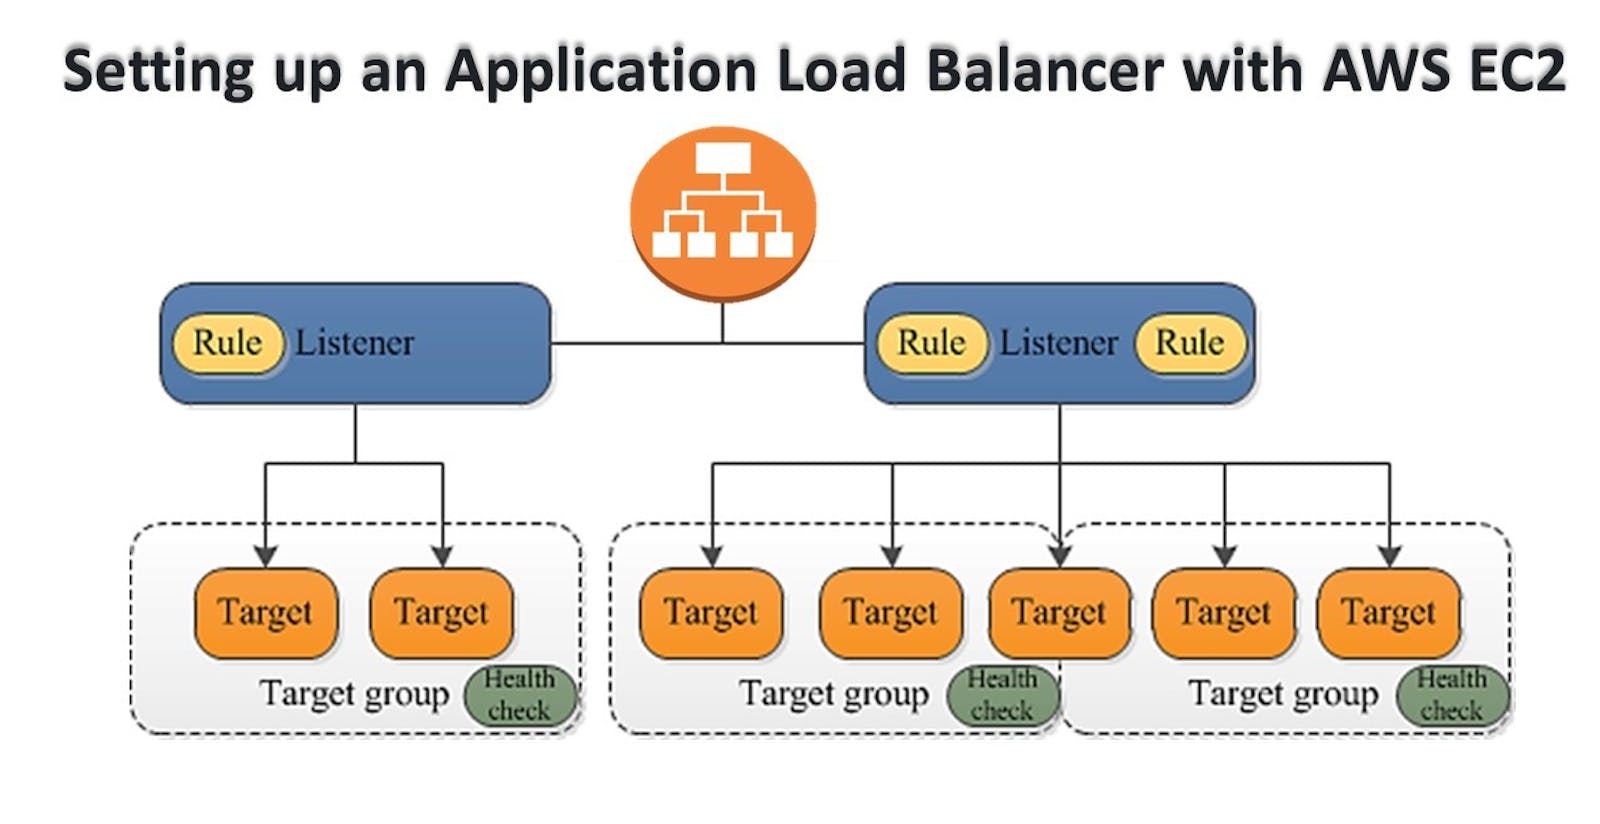 Setting up an Application Load Balancer with AWS EC2